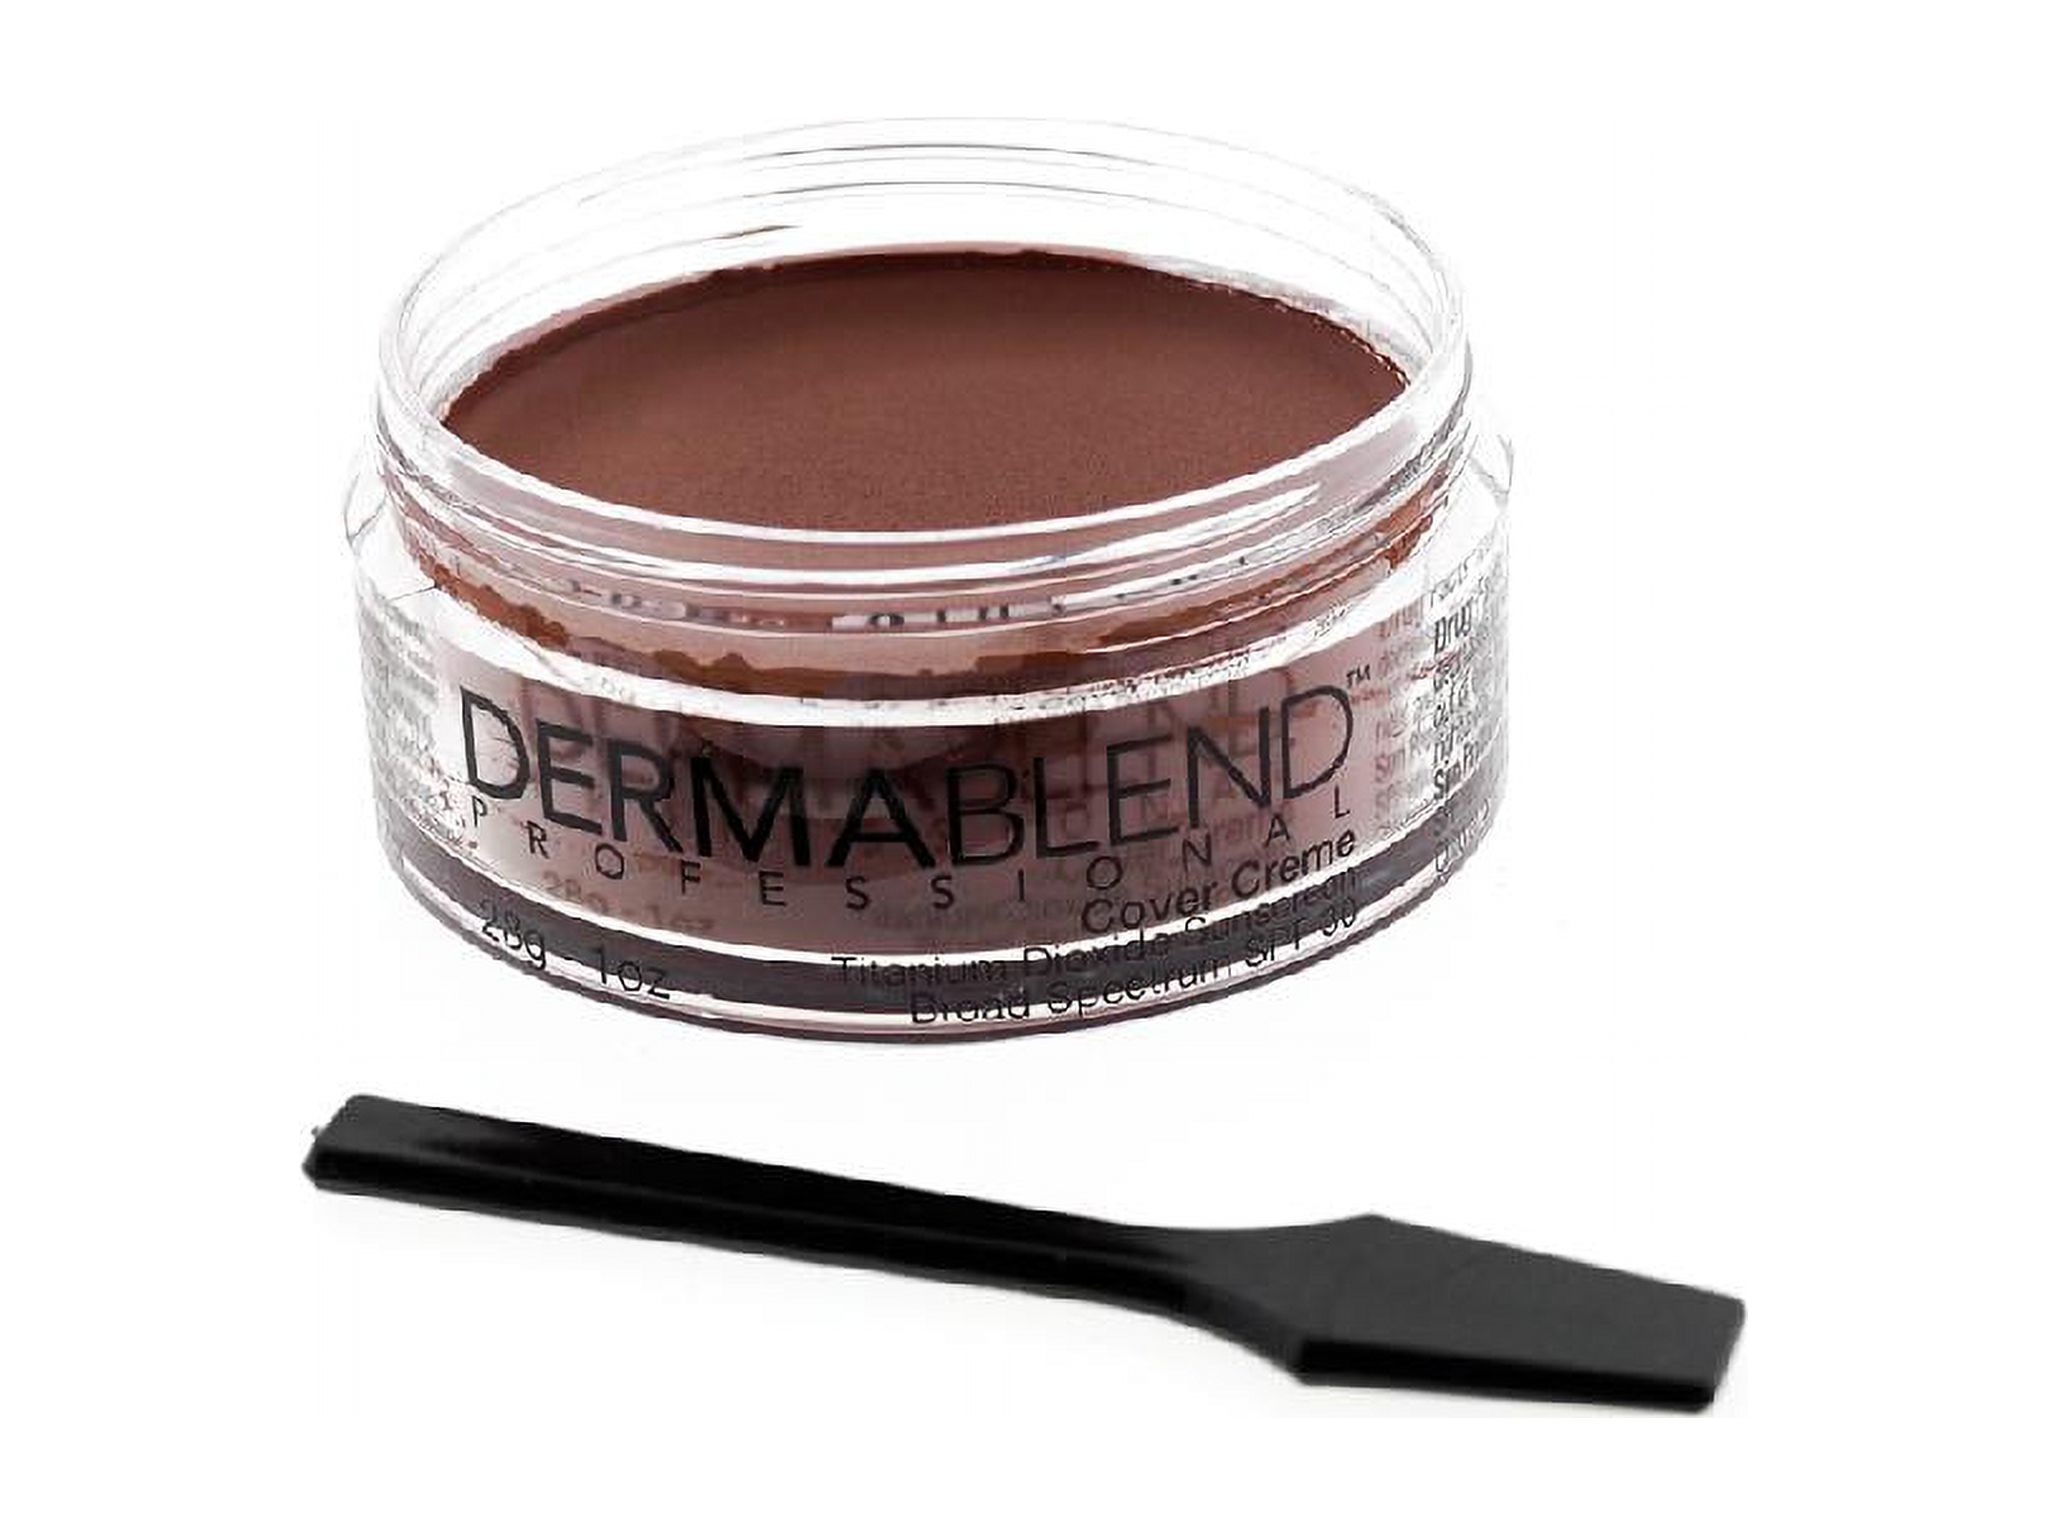 Dermablend Cover Creme Foundation SPF 30-Chocolate Brown (Chroma 6) - image 1 of 3